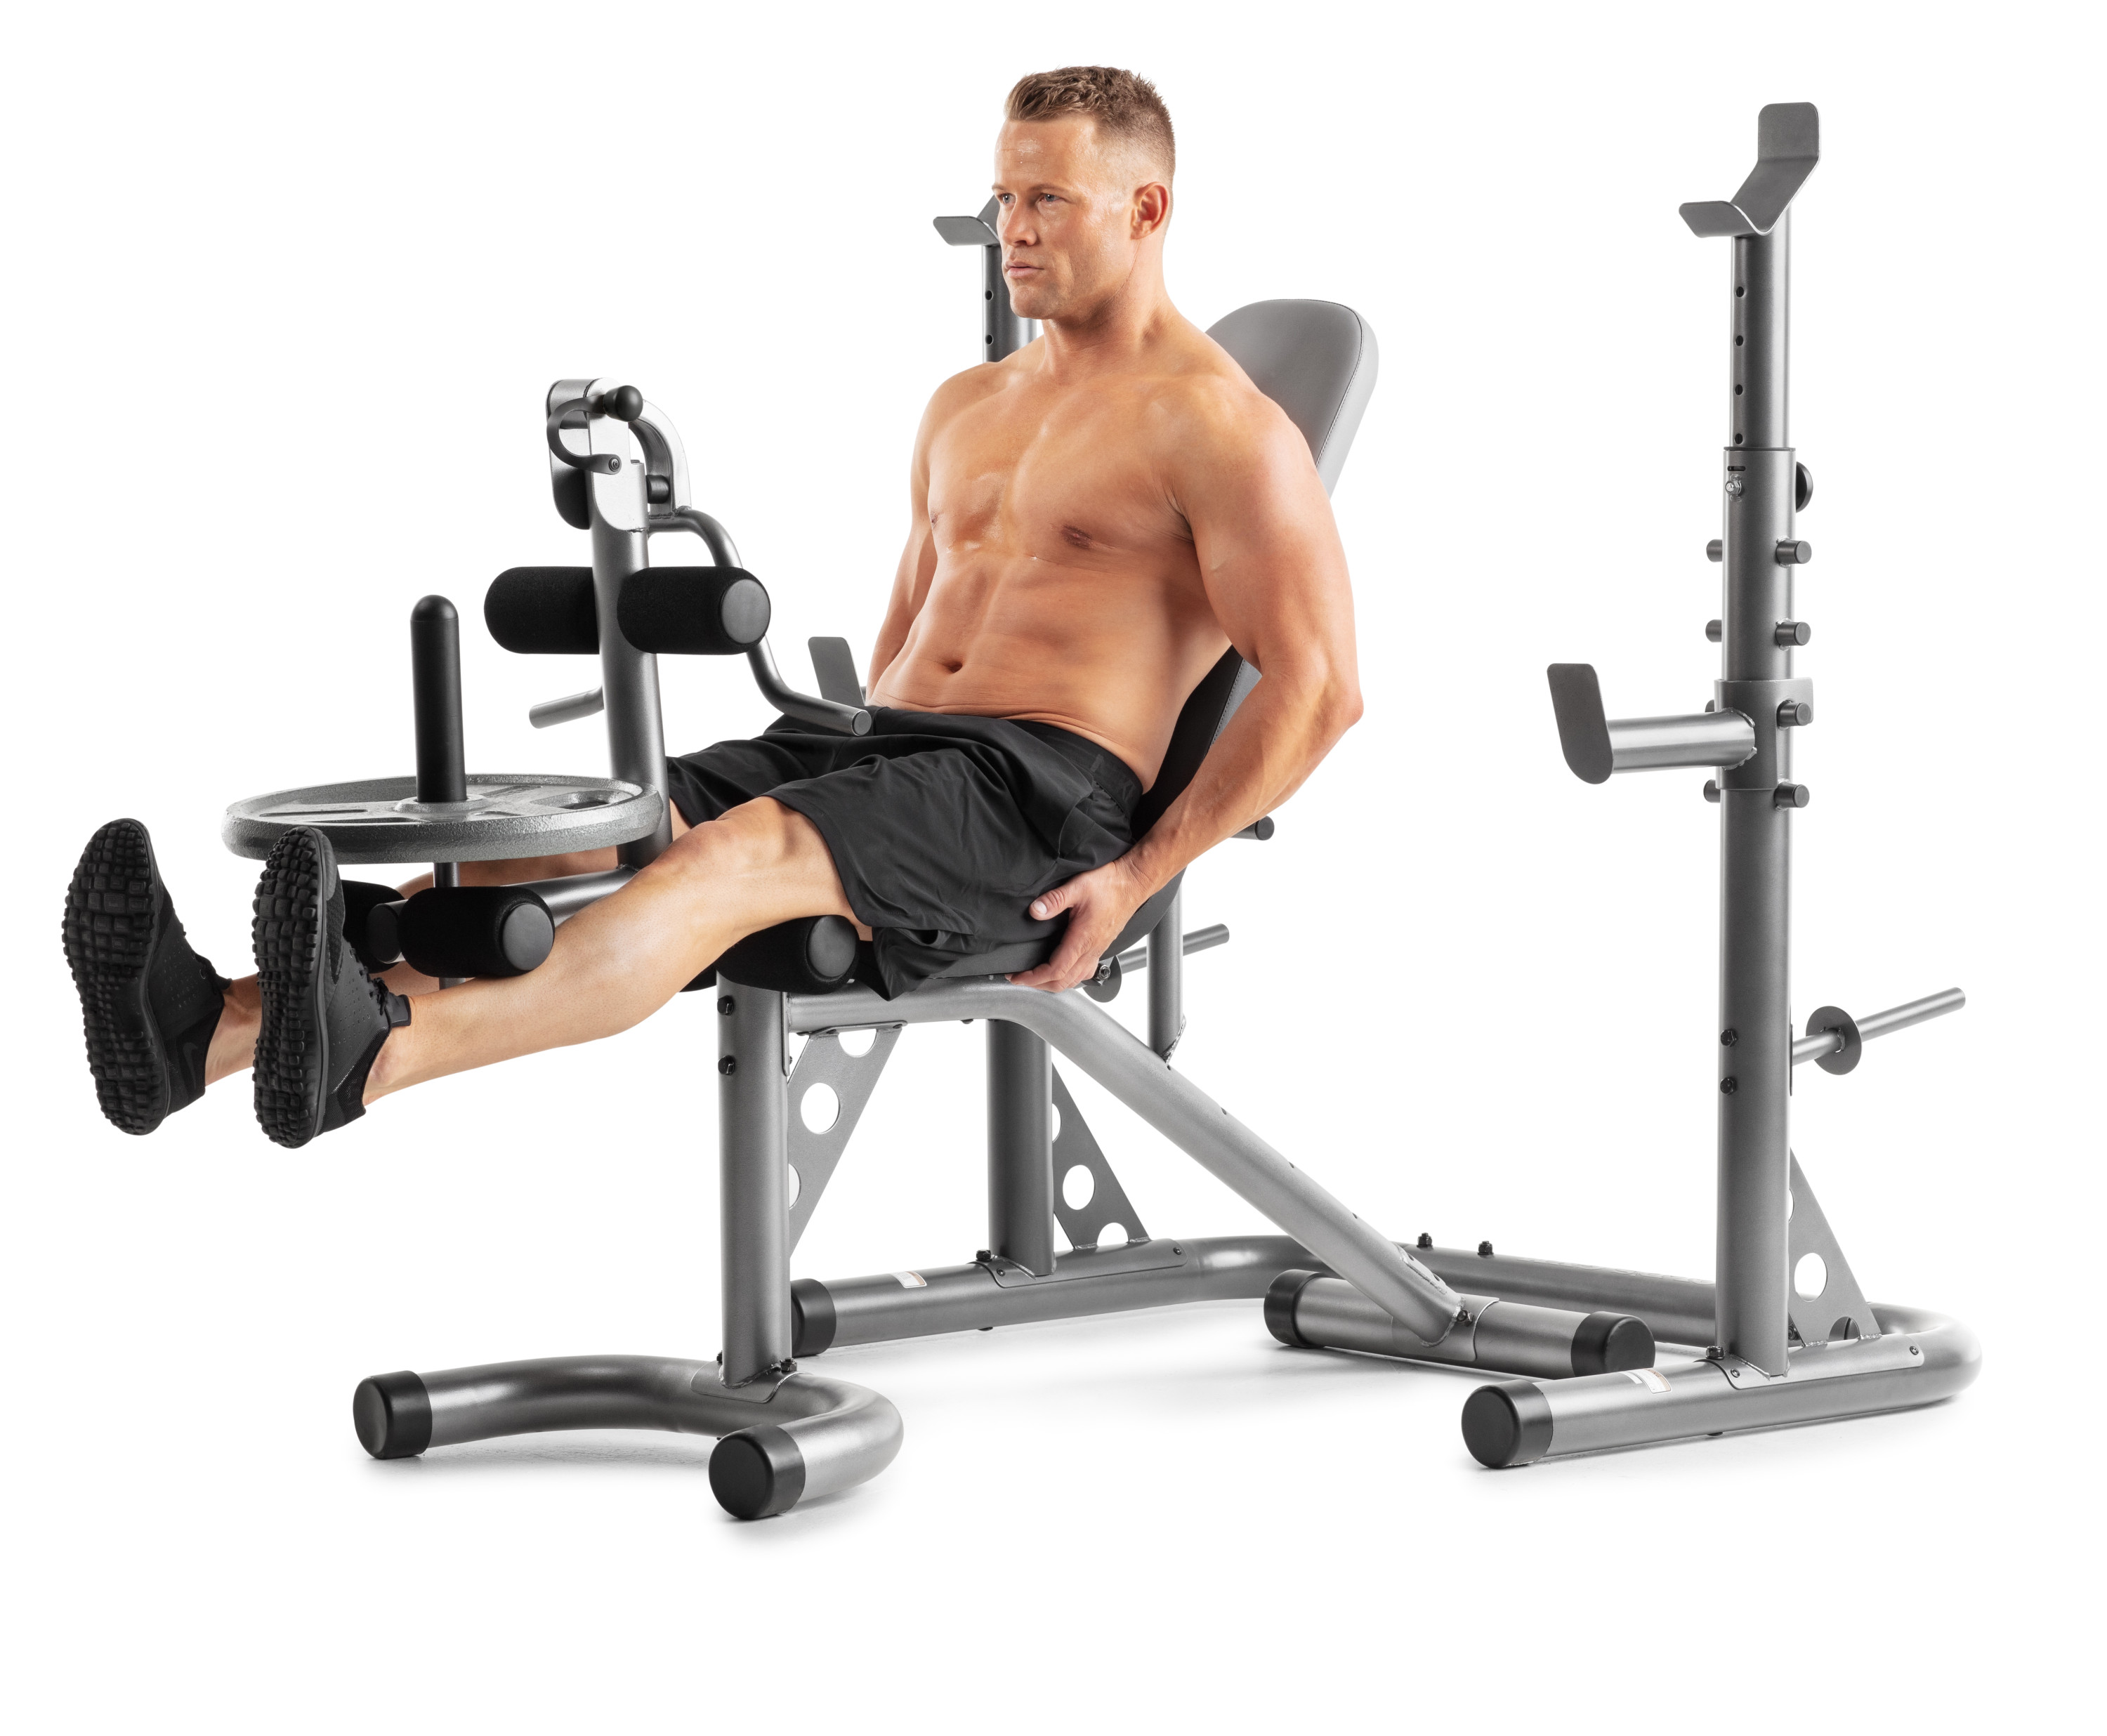 Weider XRS 20 Adjustable Bench with Olympic Squat Rack and Preacher Pad, 610 lb. Weight Limit - image 13 of 13